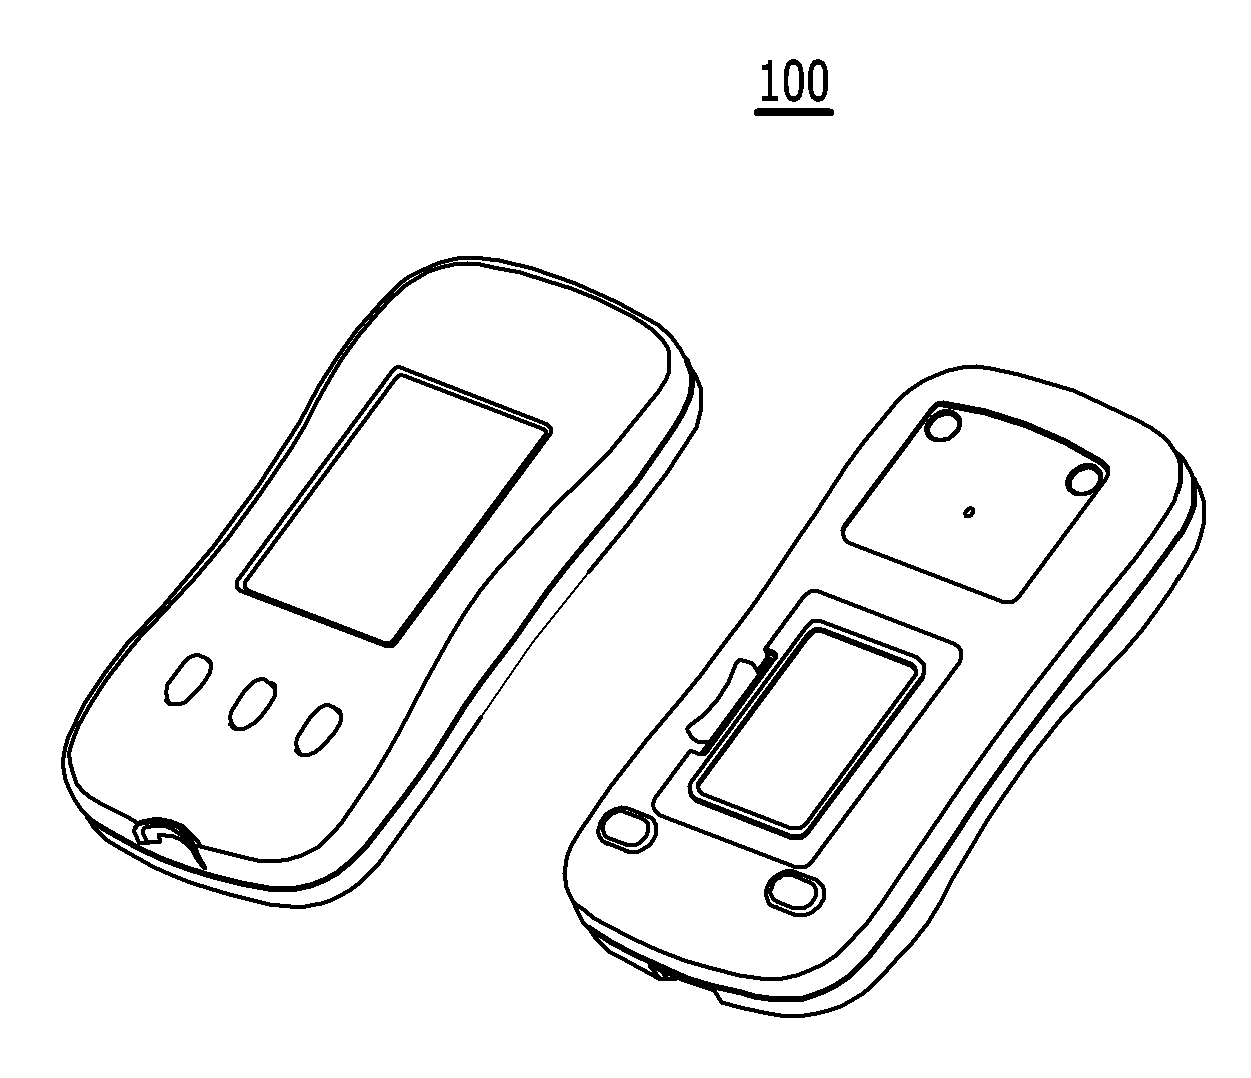 Apparatus and method for measuring concentration of whole blood samples